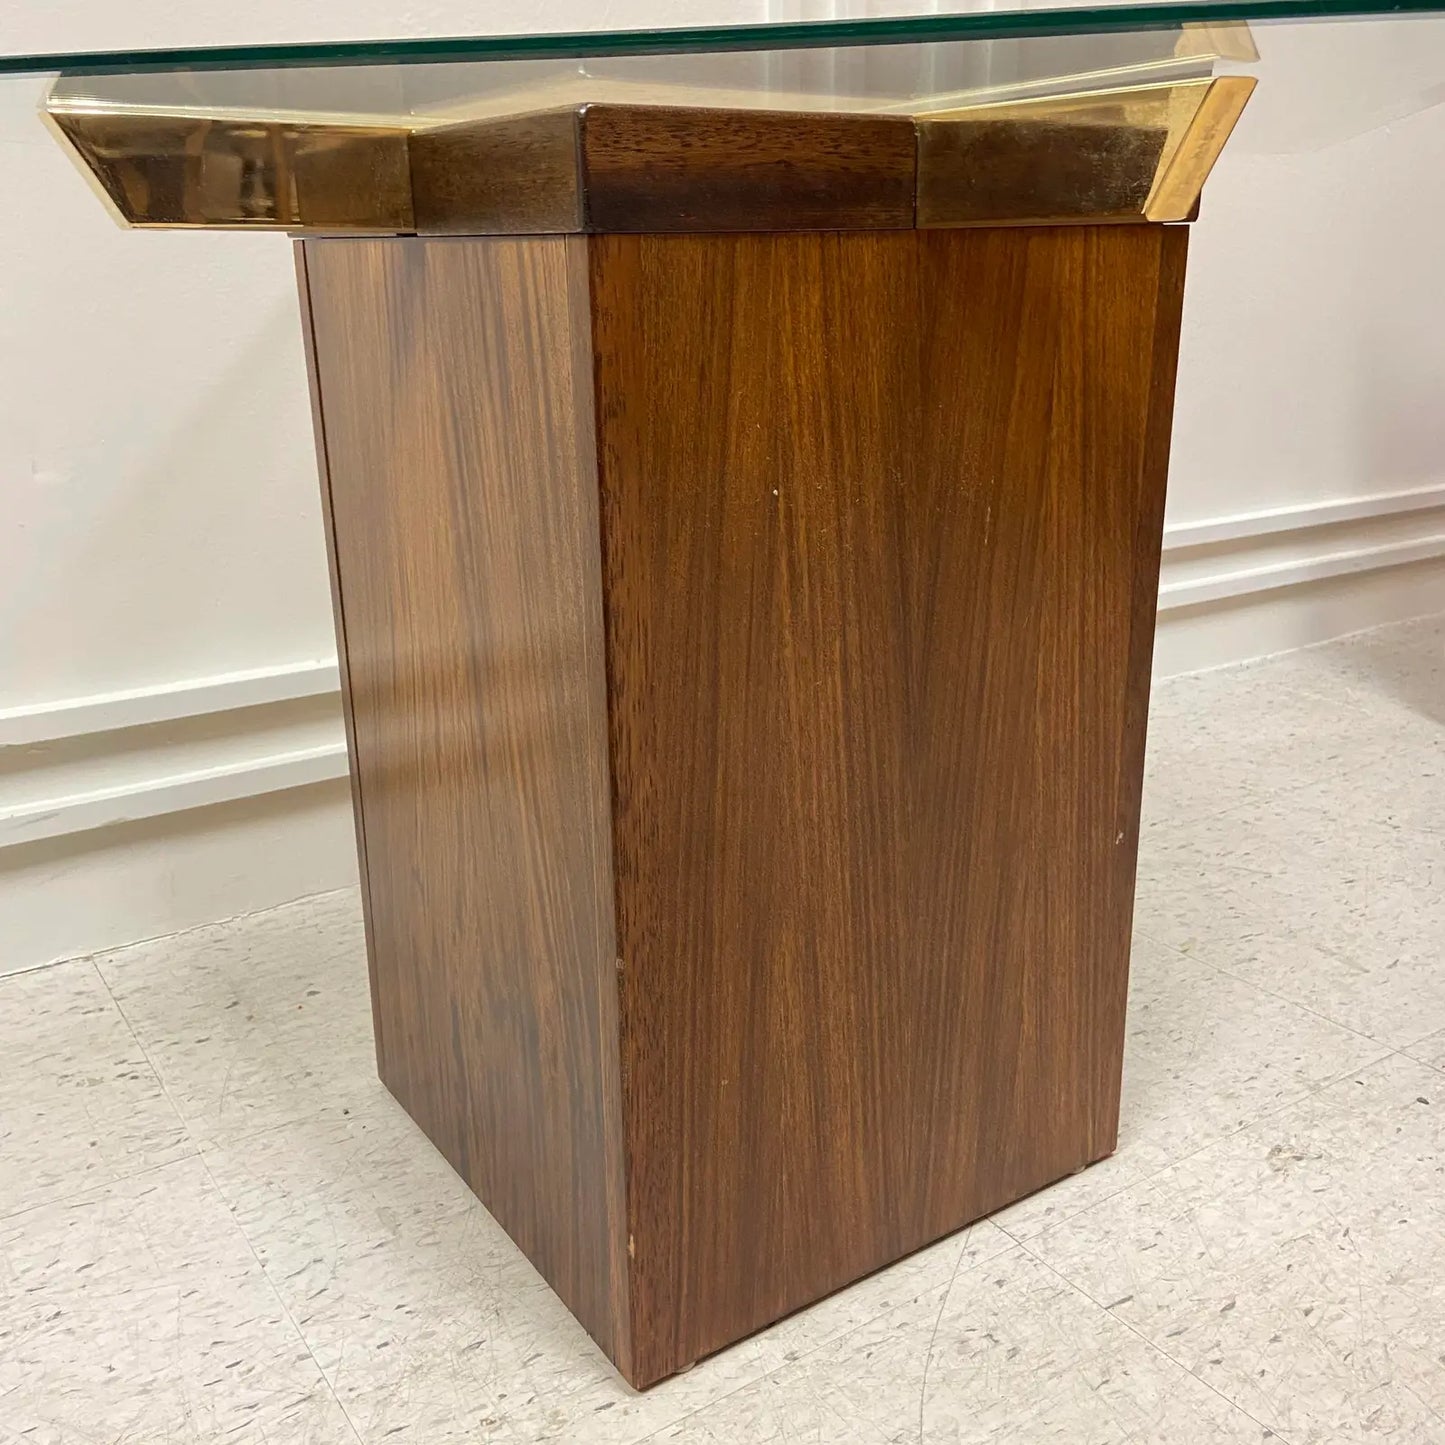 DANISH TEAK SIDE TABLE WITH BRASS CROSS BRACES AND GLASS TOP